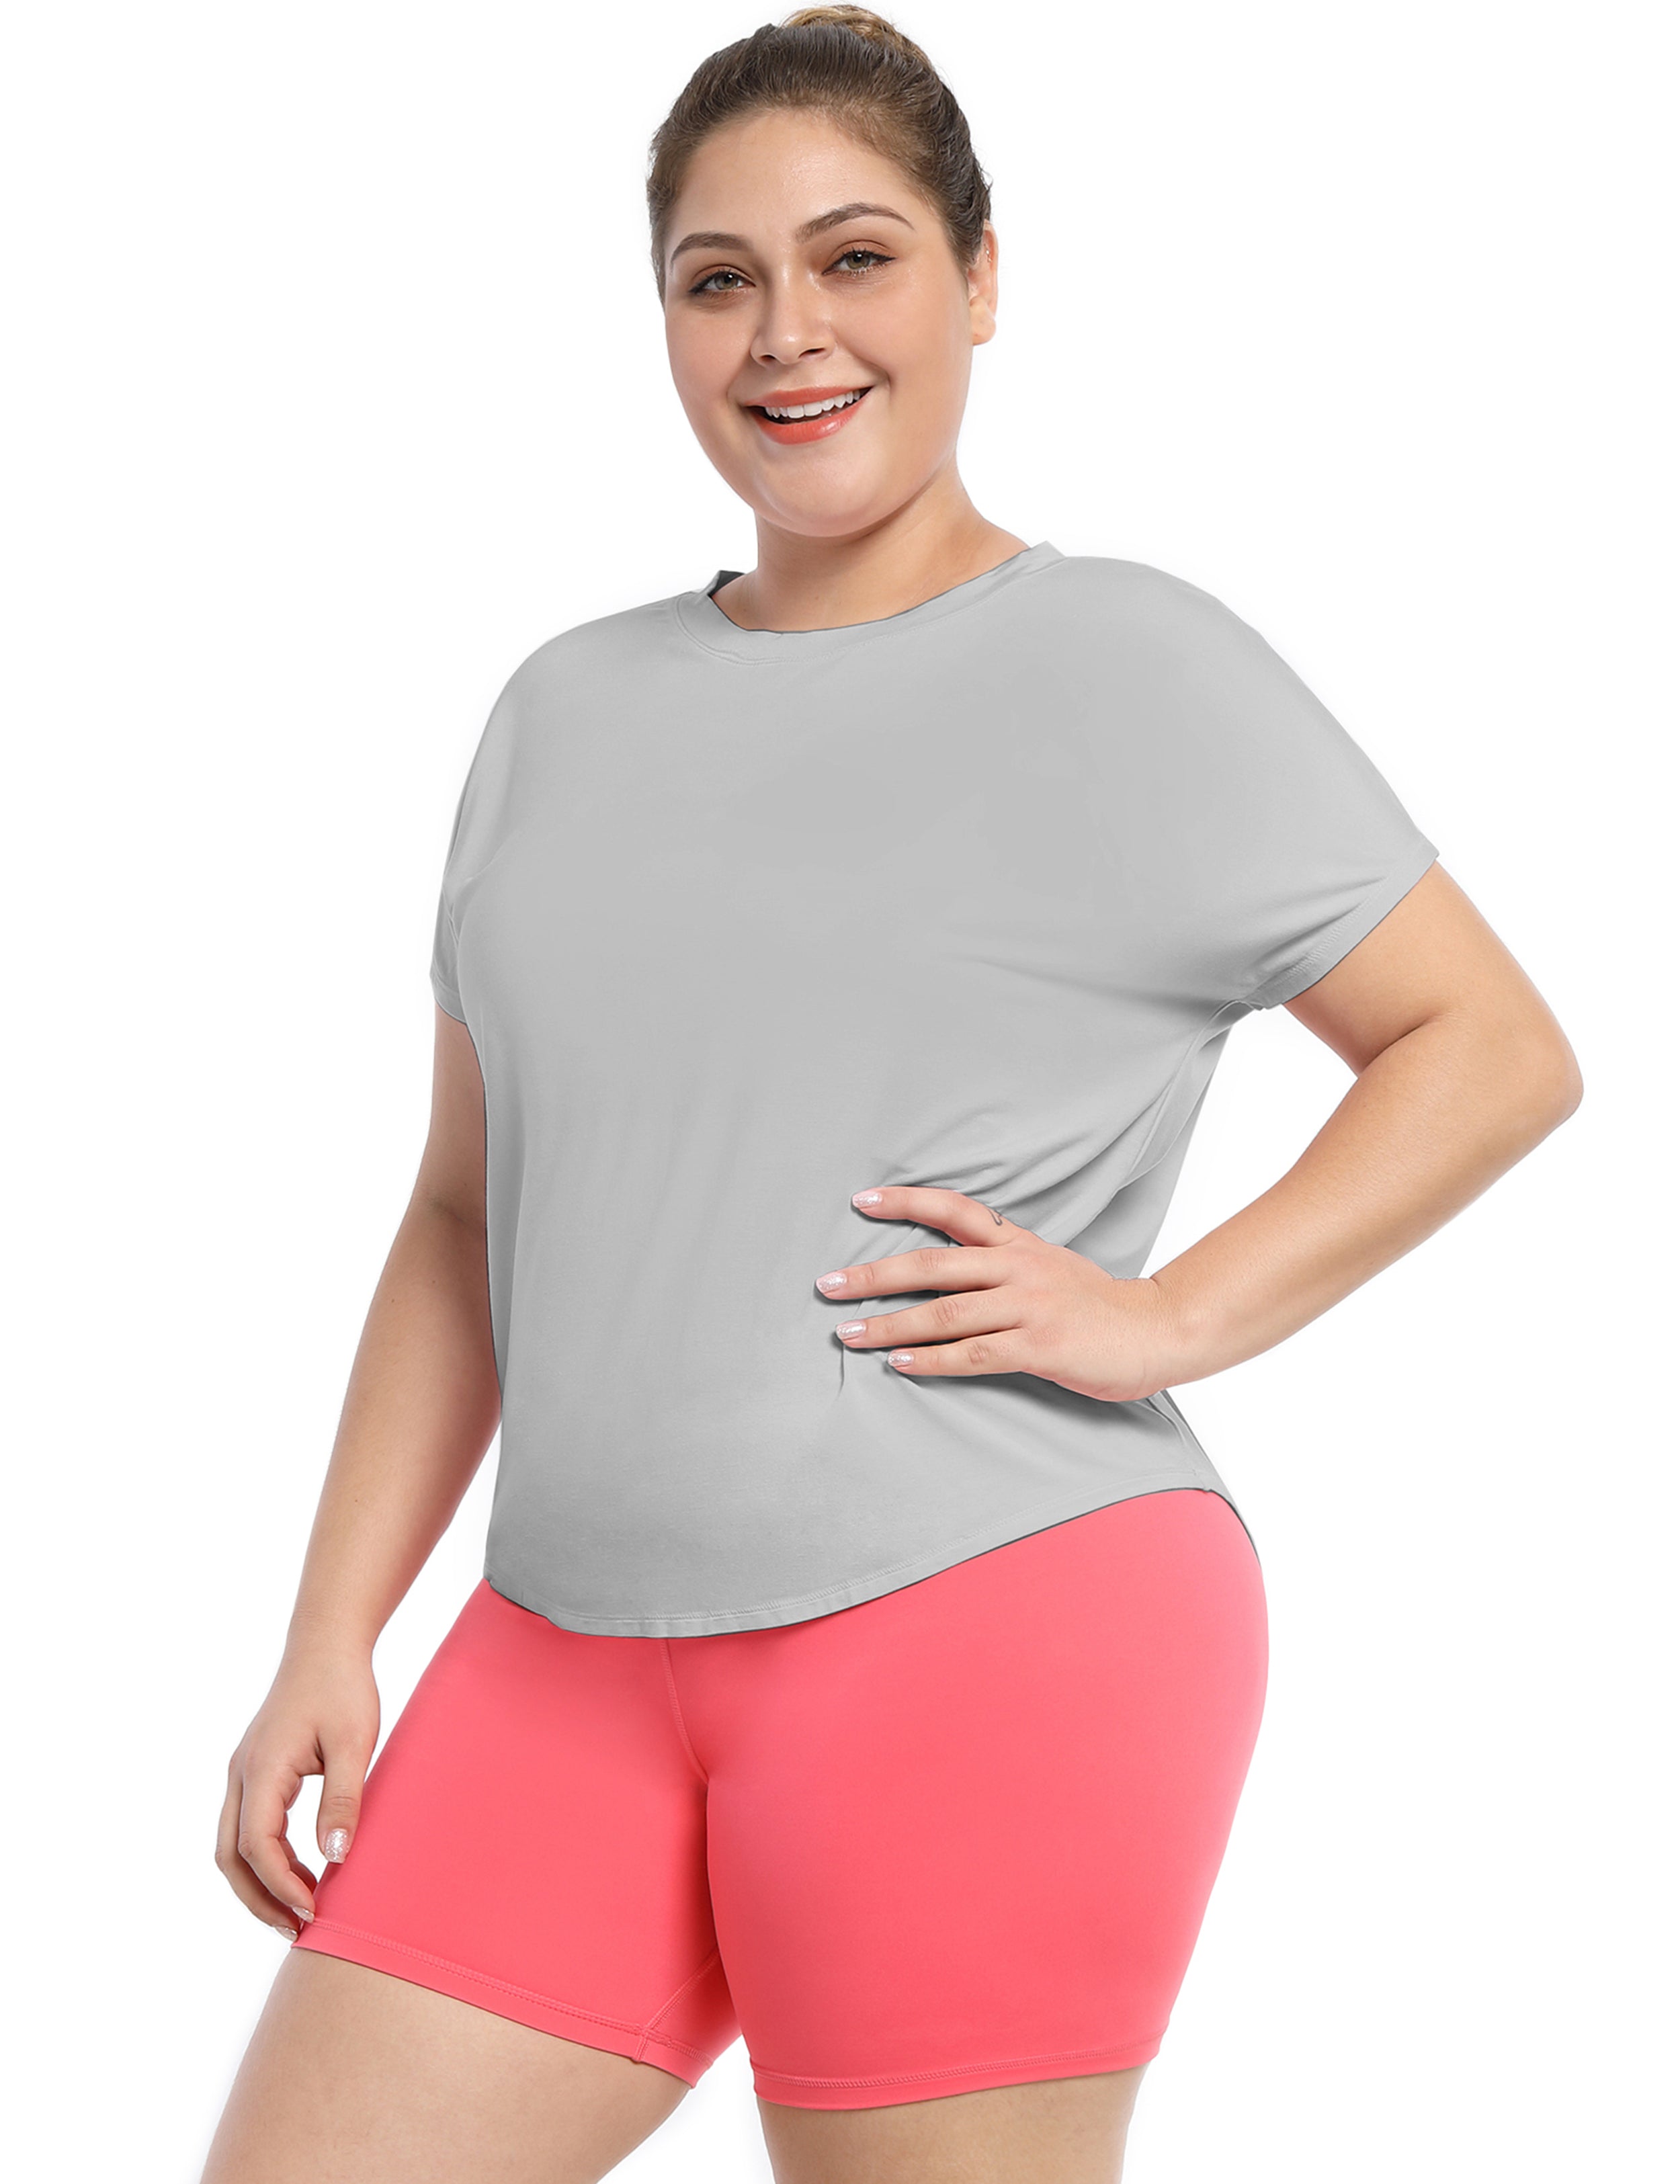 Hip Length Short Sleeve Shirt lightgray 93%Modal/7%Spandex Designed for Running Classic Fit, Hip Length An easy fit that floats away from your body Sits below the waistband for moderate, everyday coverage Lightweight, elastic, strong fabric for moisture absorption and perspiration, sports and fitness clothing.